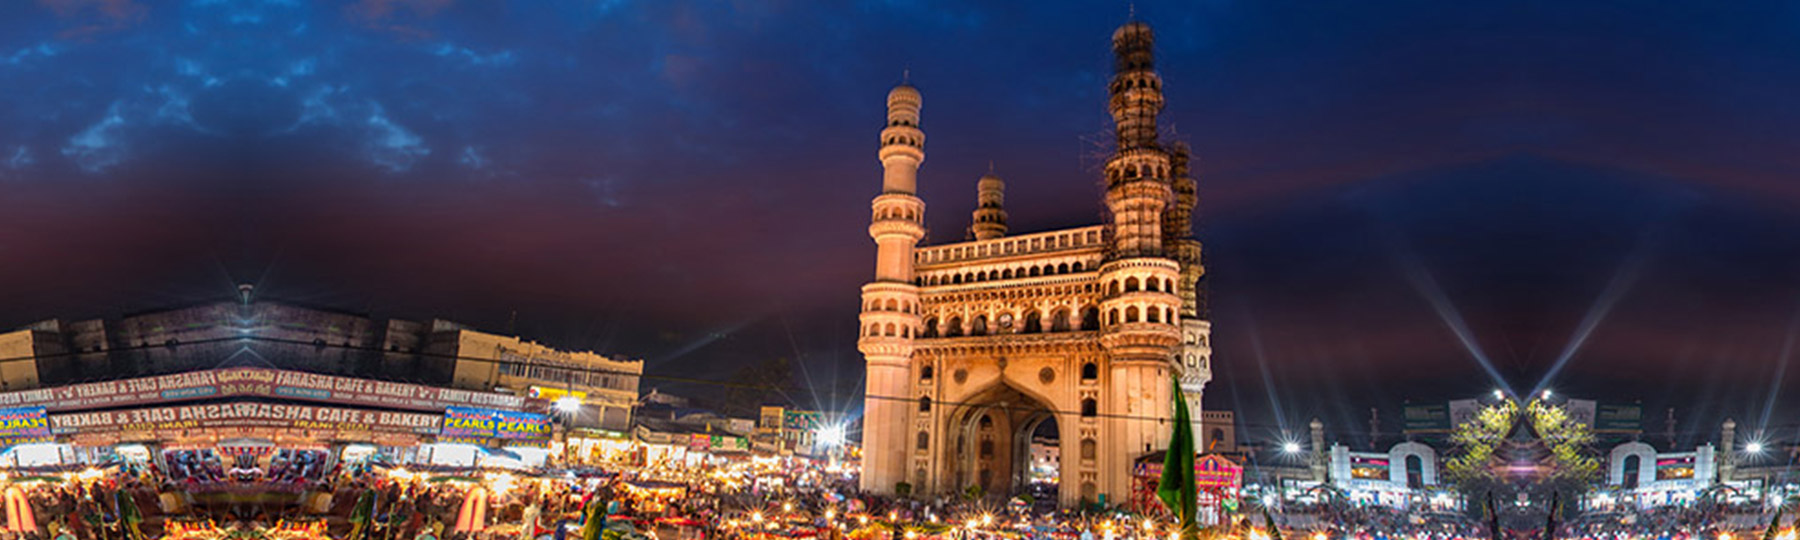 hyderabad tour cost